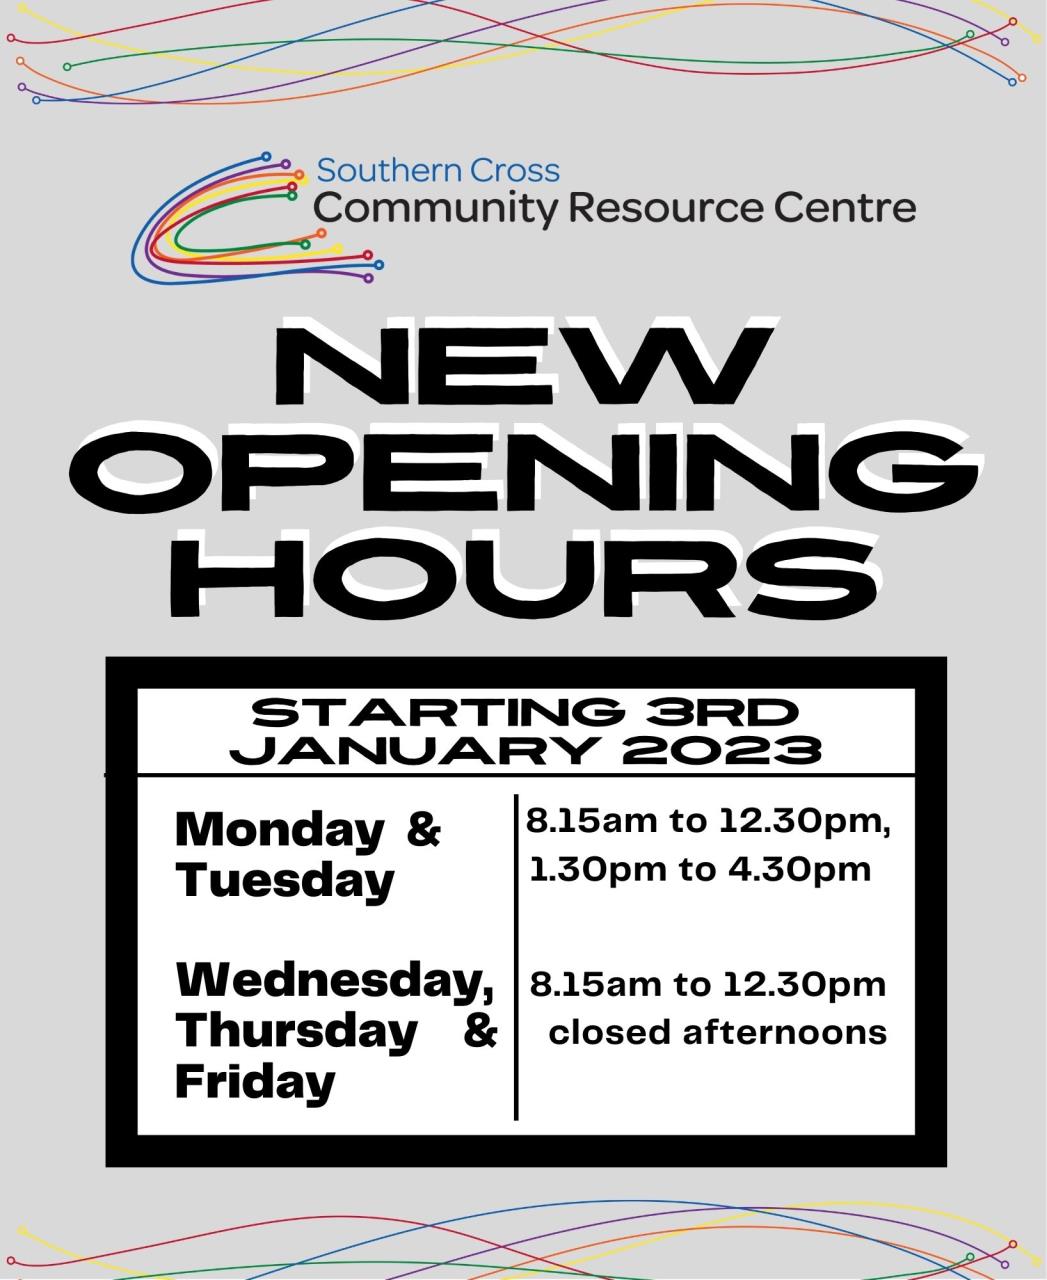 CRC hours changing